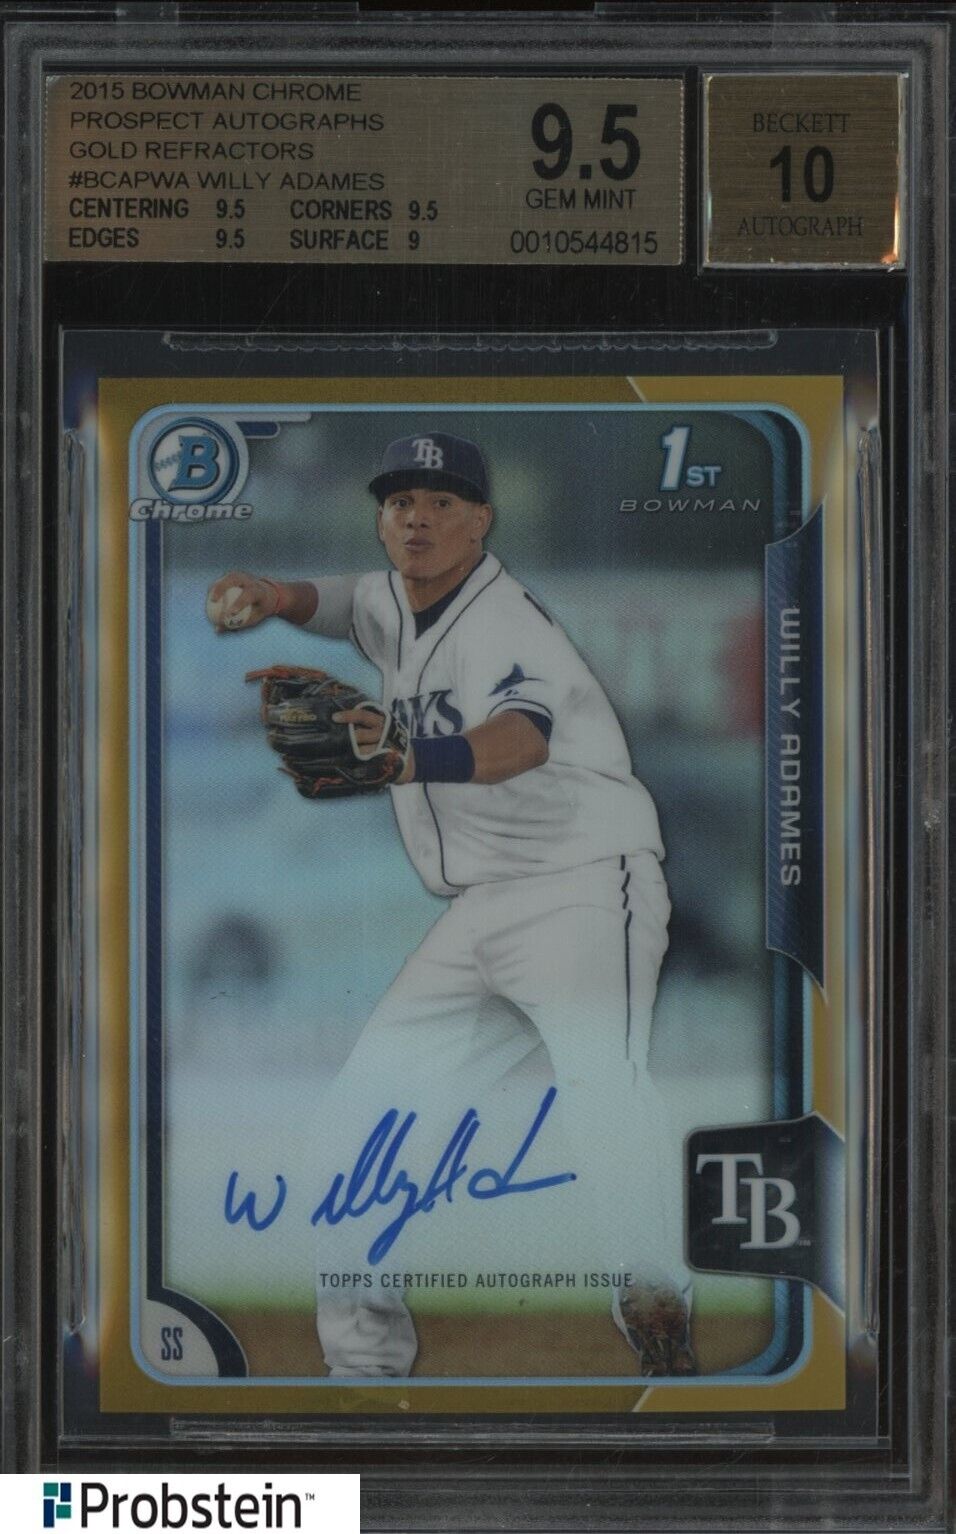 2015 Bowman Chrome Gold Refractor Willy Adames RC Rookie /50 BGS 9.5 w/ 10 AUTO